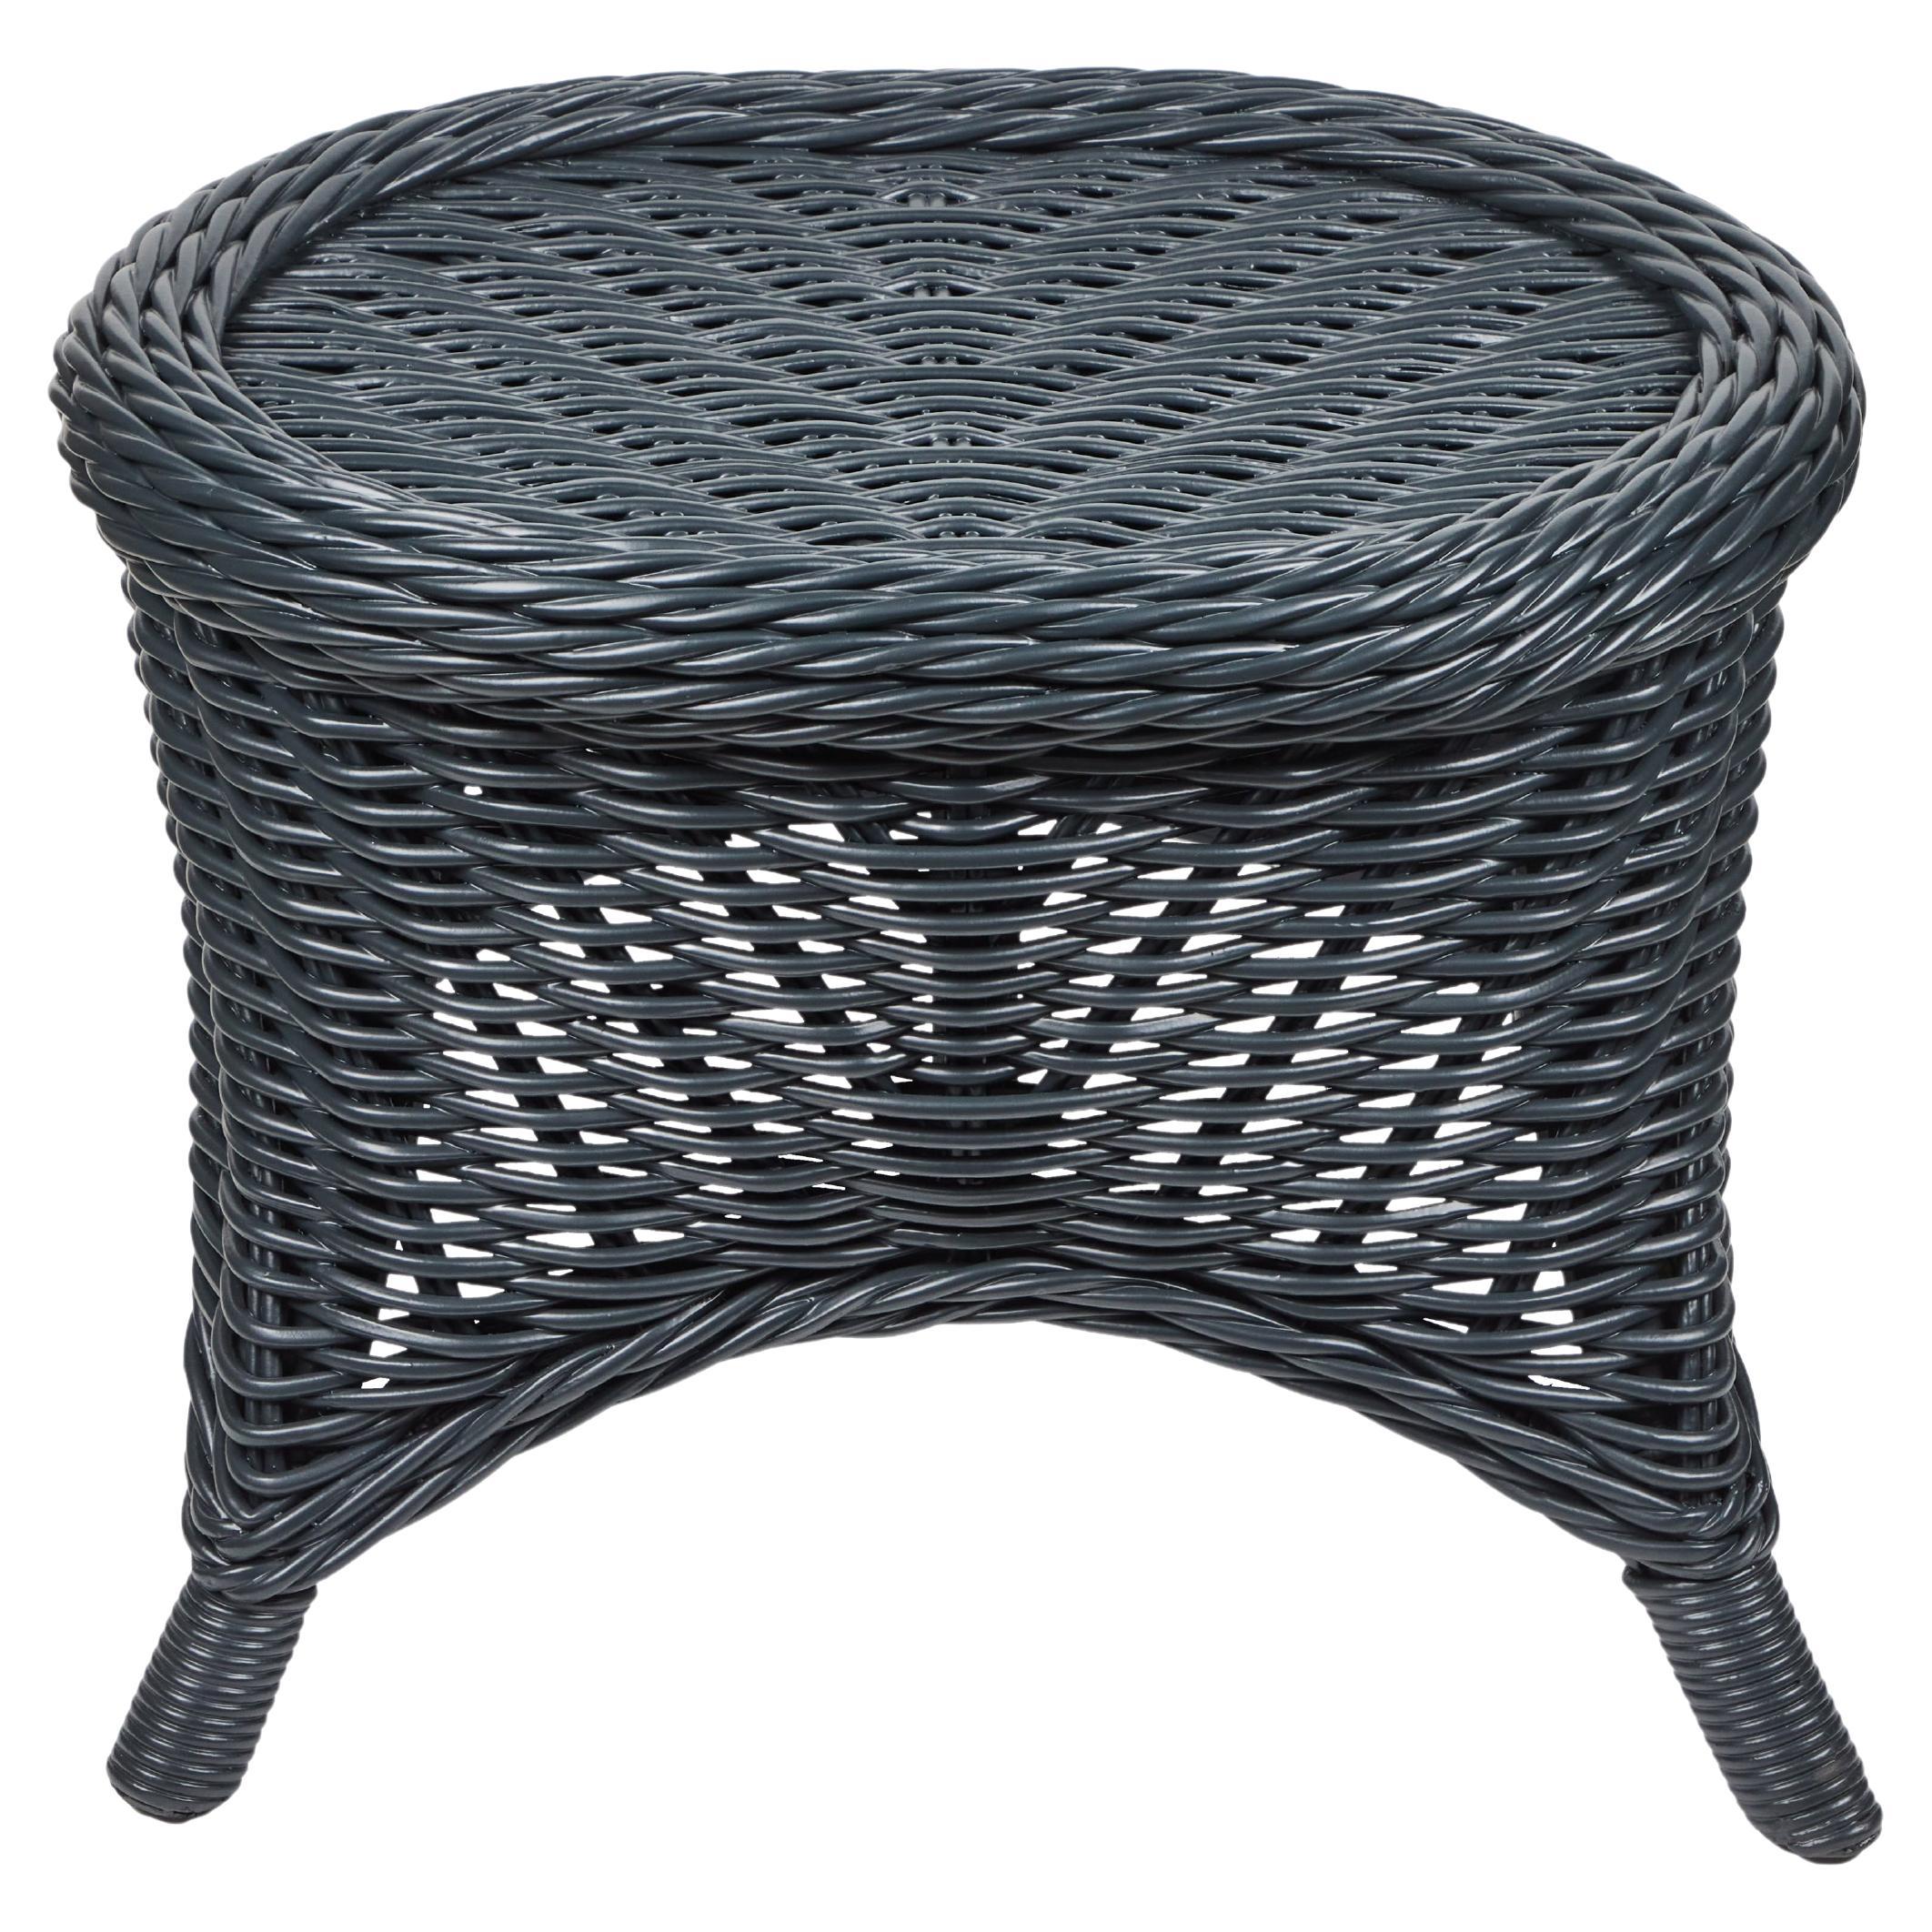 What is the best paint to use on wicker furniture?